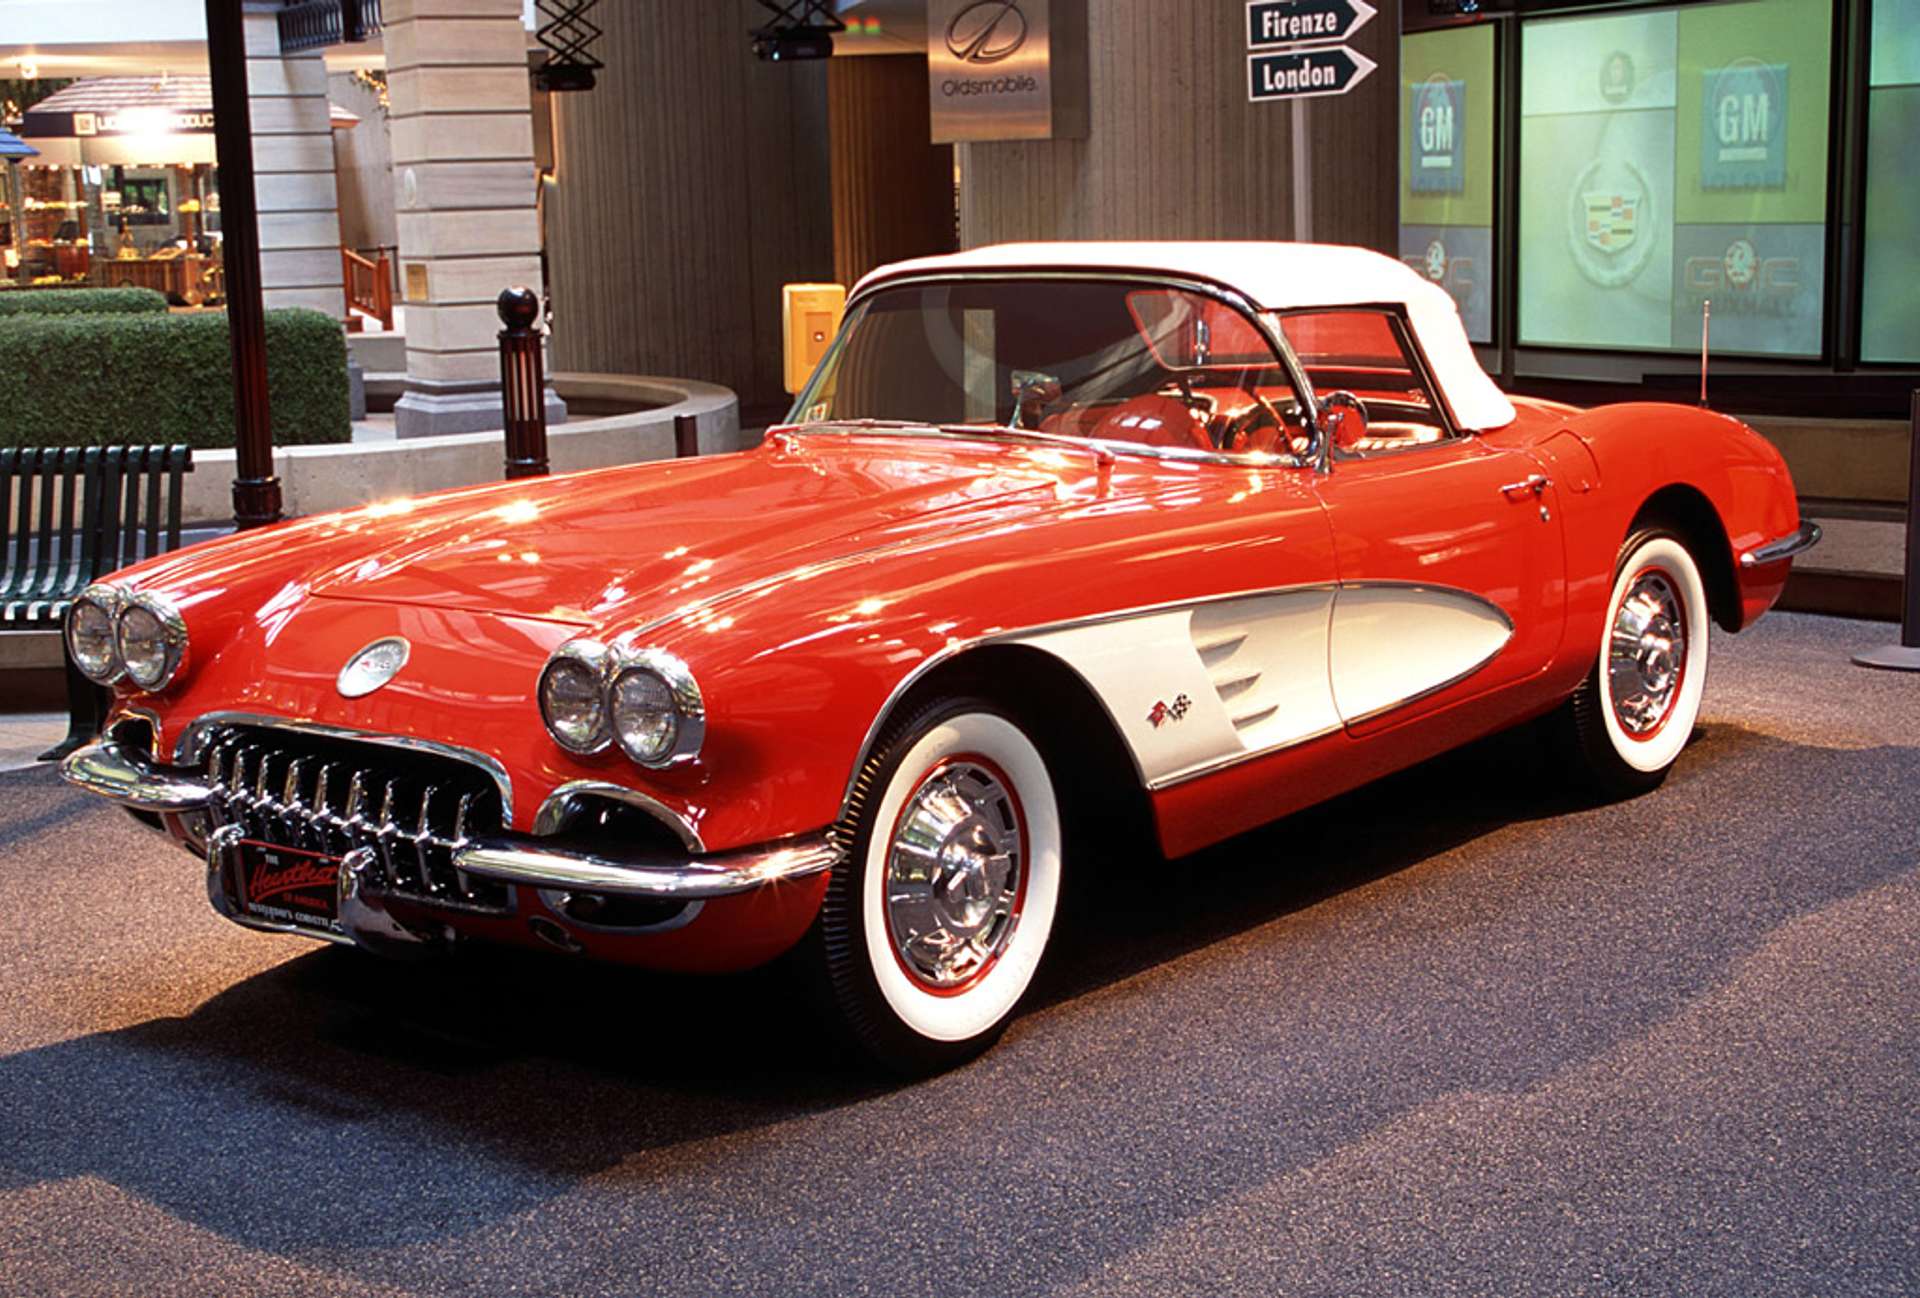 A vintage tomato red Chevrolet Corvette in a shopping mall.